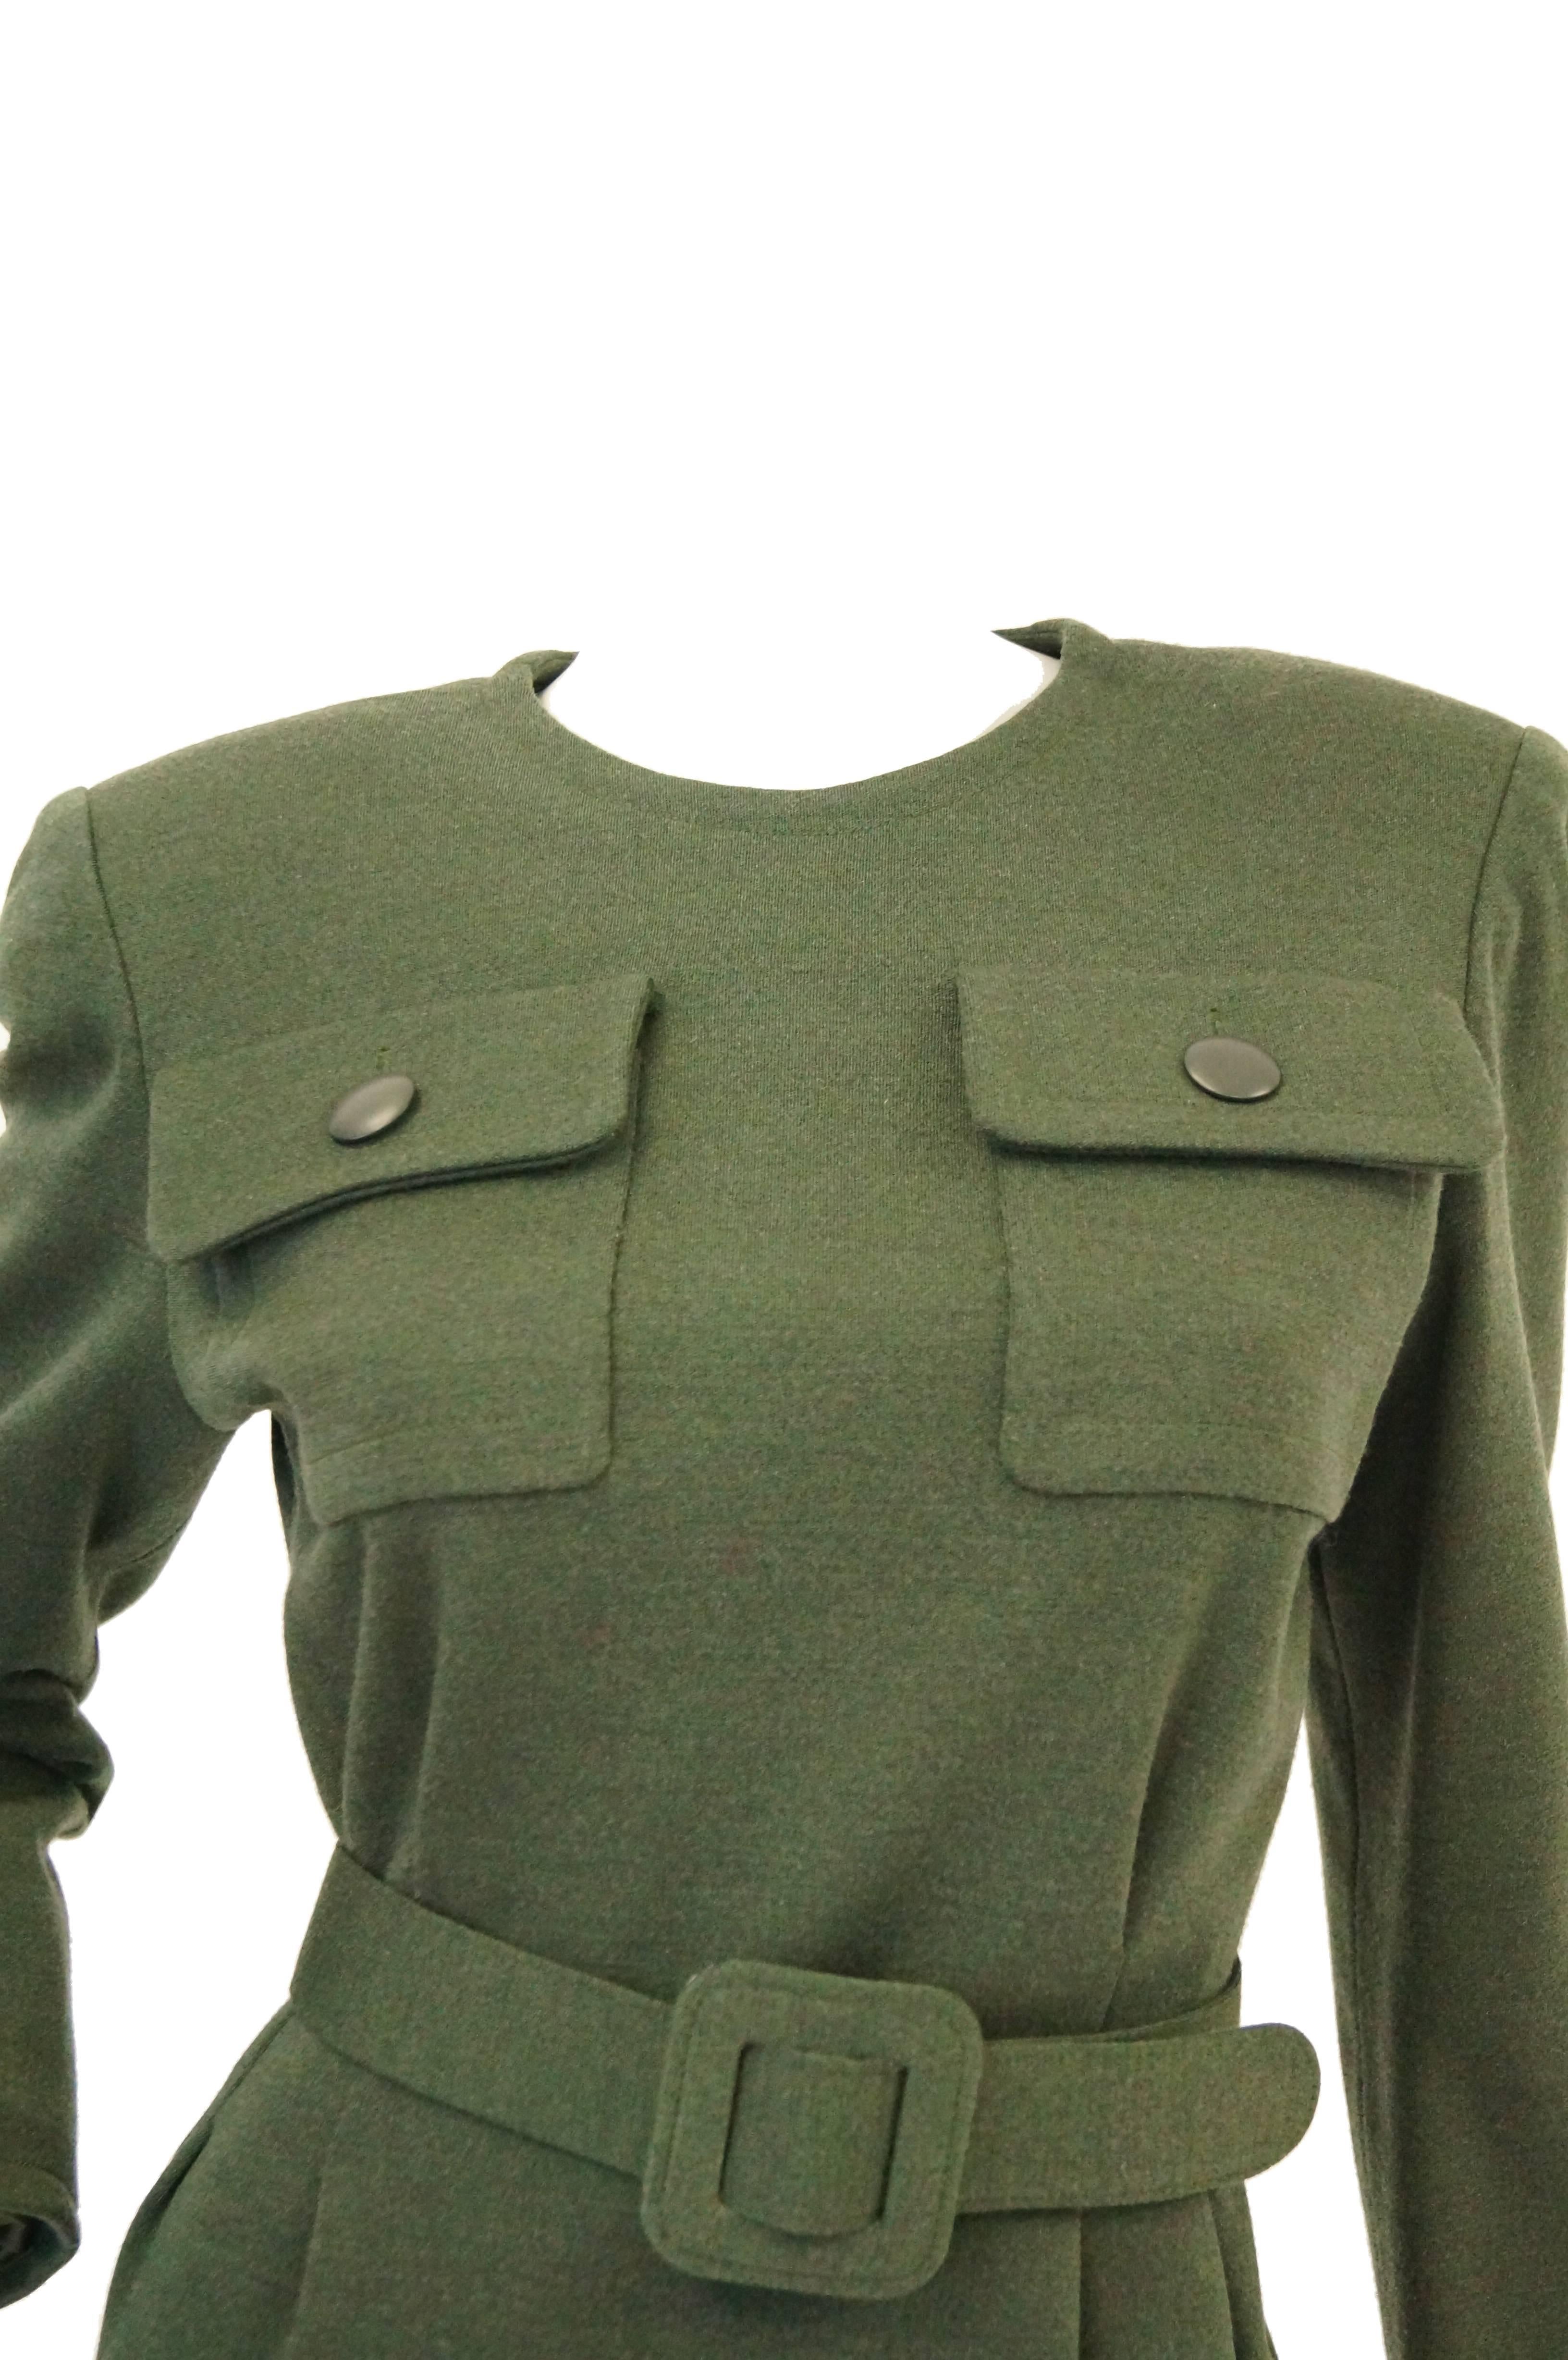 Understated and versatile olive green wool dress by Hubert de Givenchy. The dress hits at the knees, is long sleeved, and has a tight jewel neckline. The dress features two button closure flap pockets at the bust, a wide waist - cinching belt with